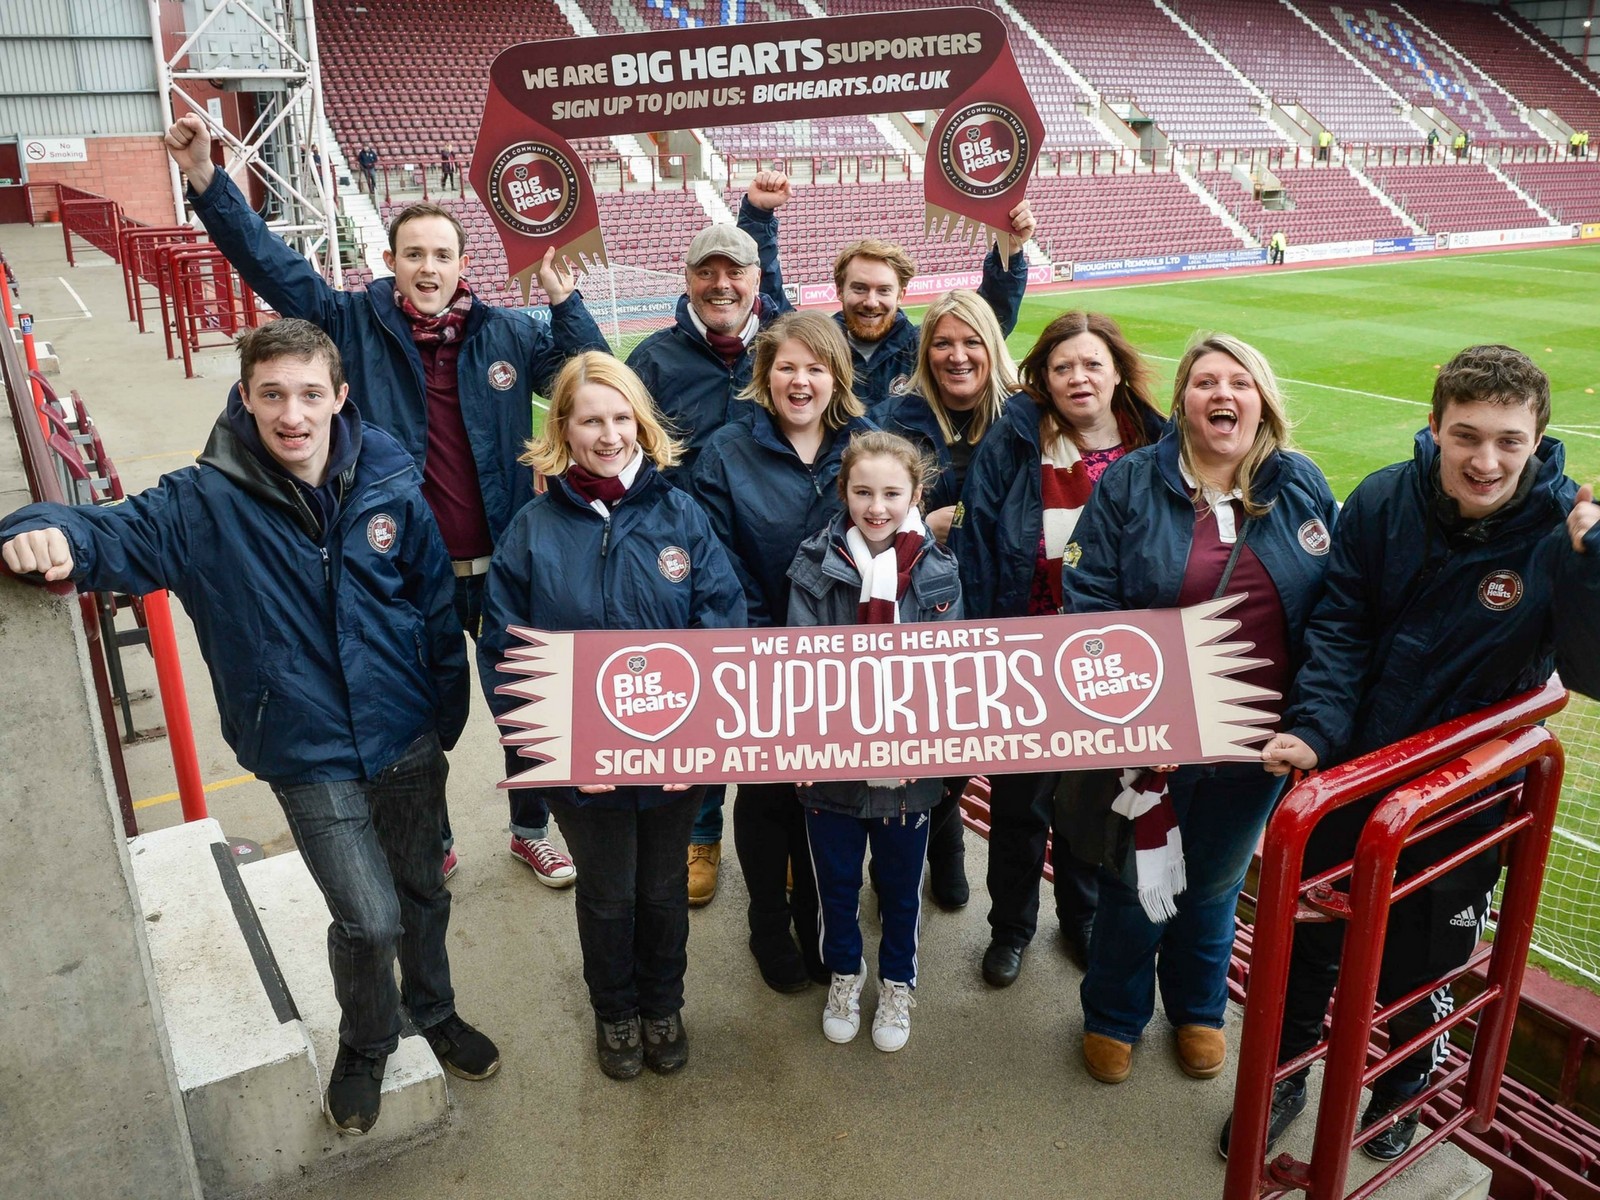  » Big Hearts Supporters shortlisted for Community Project of the Year!